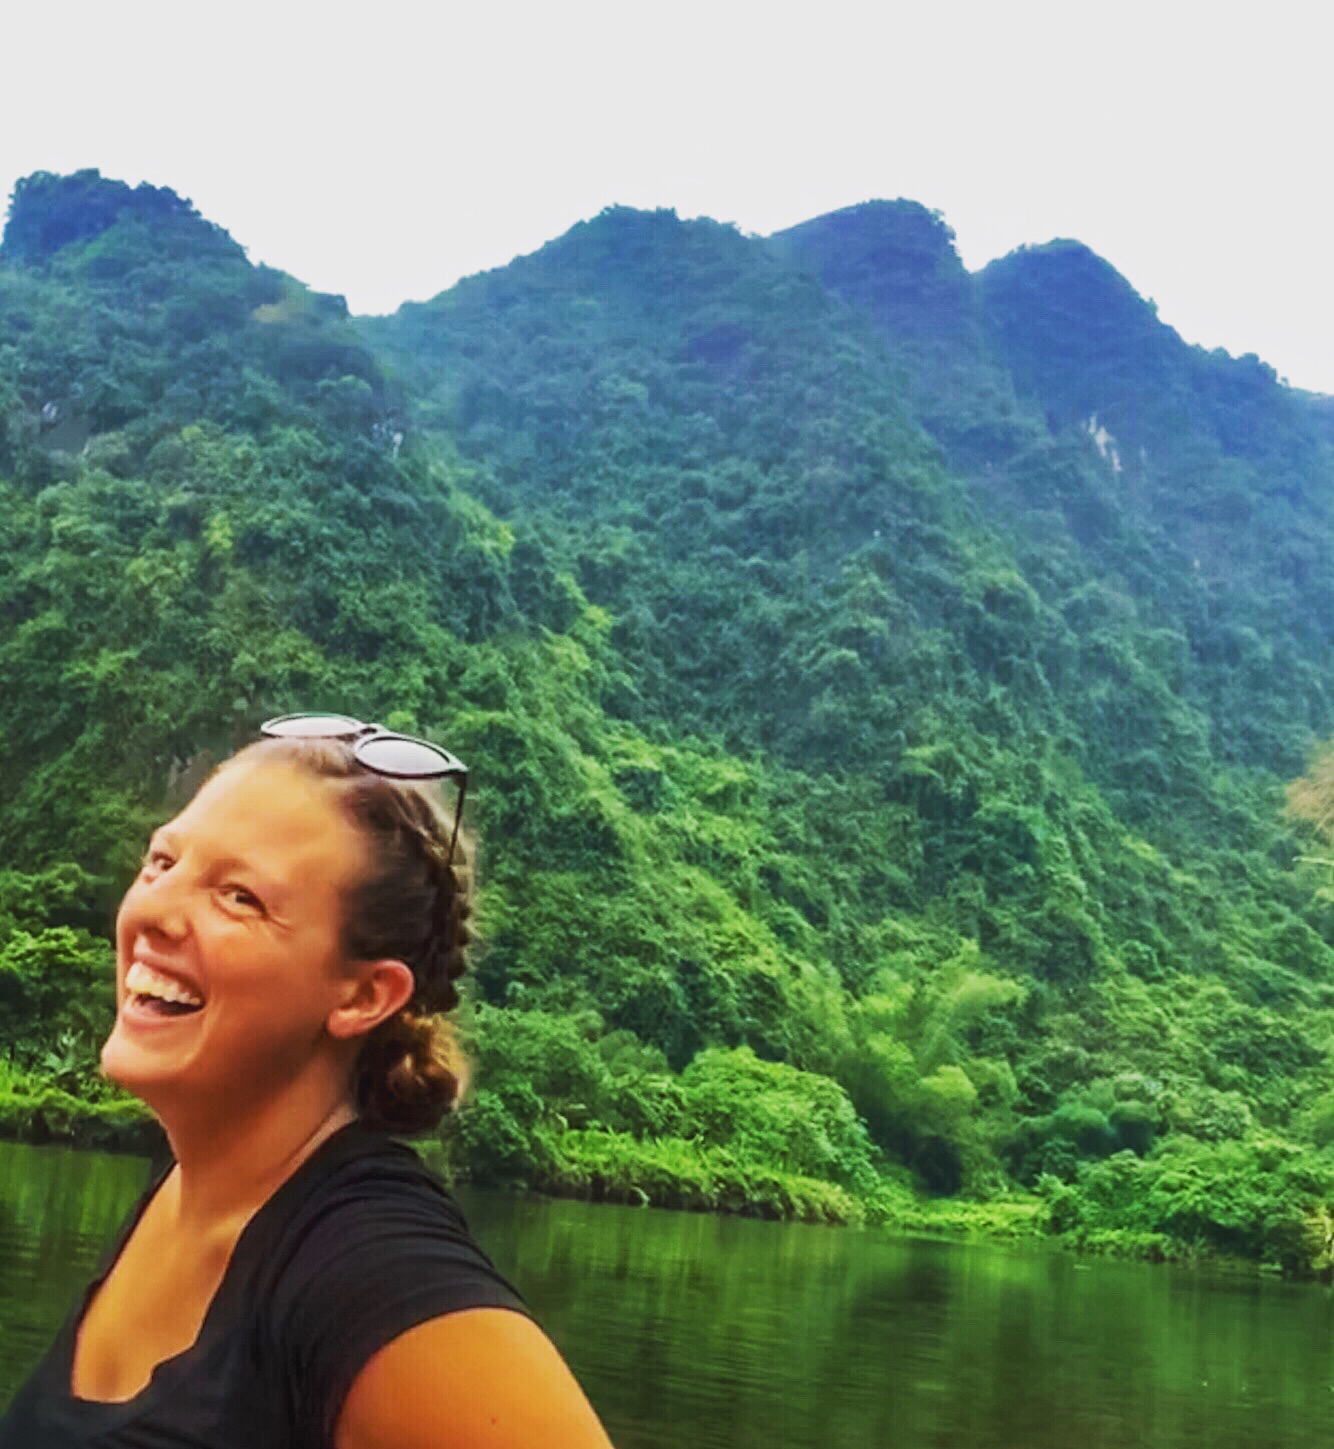 15 memorable lessons I learned living abroad